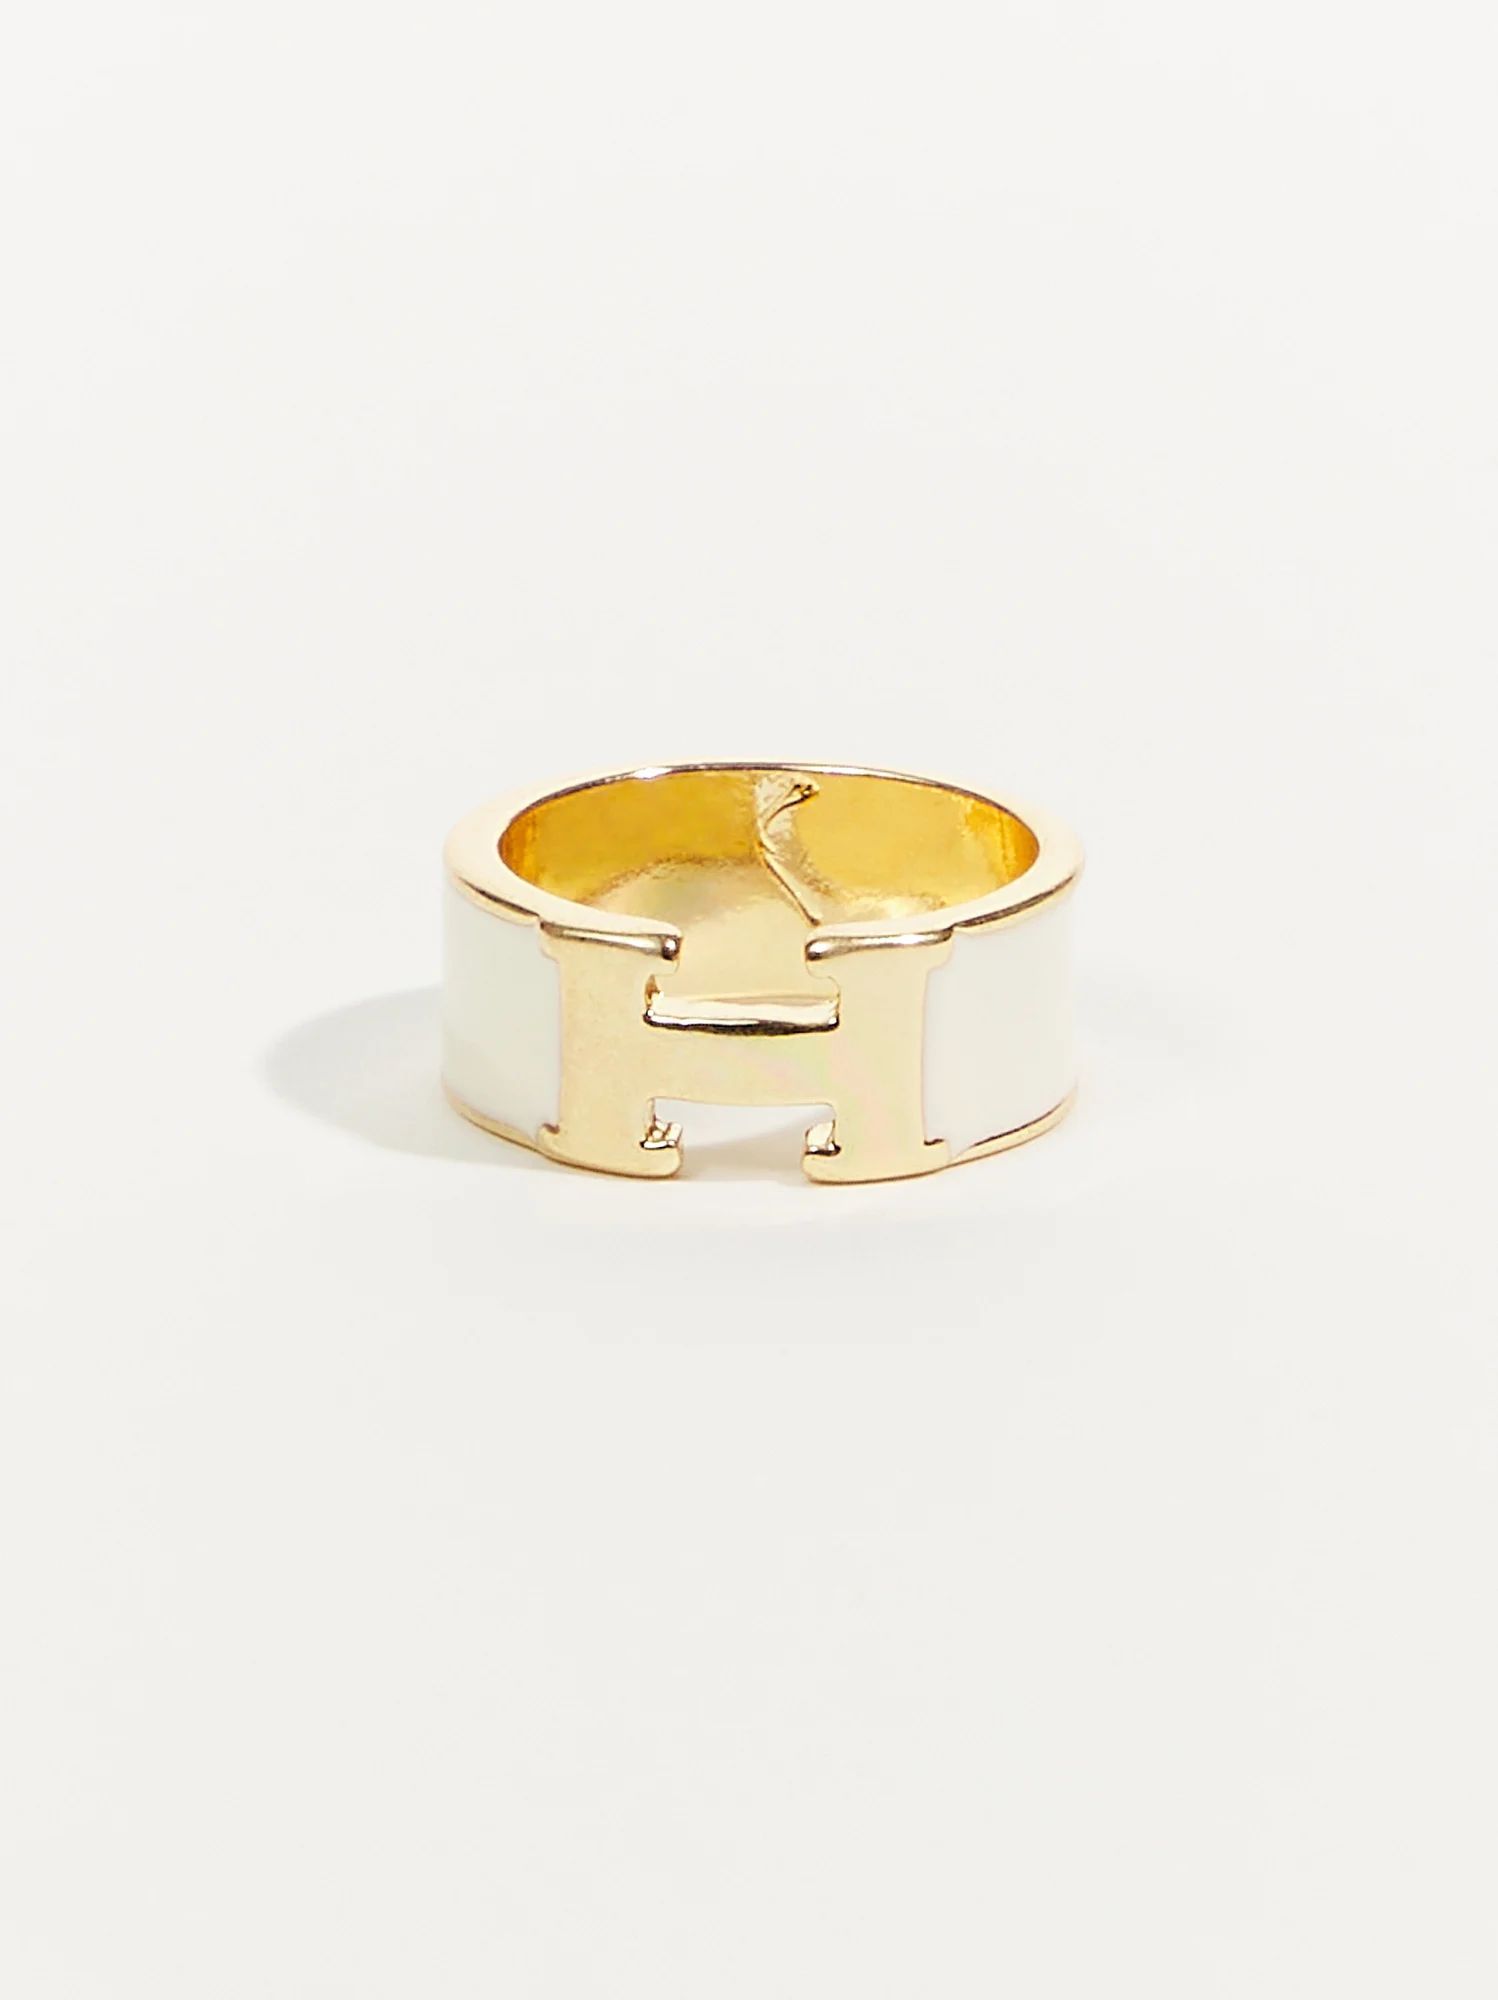 H Enamel Band Ring in Gold | Altar'd State | Altar'd State